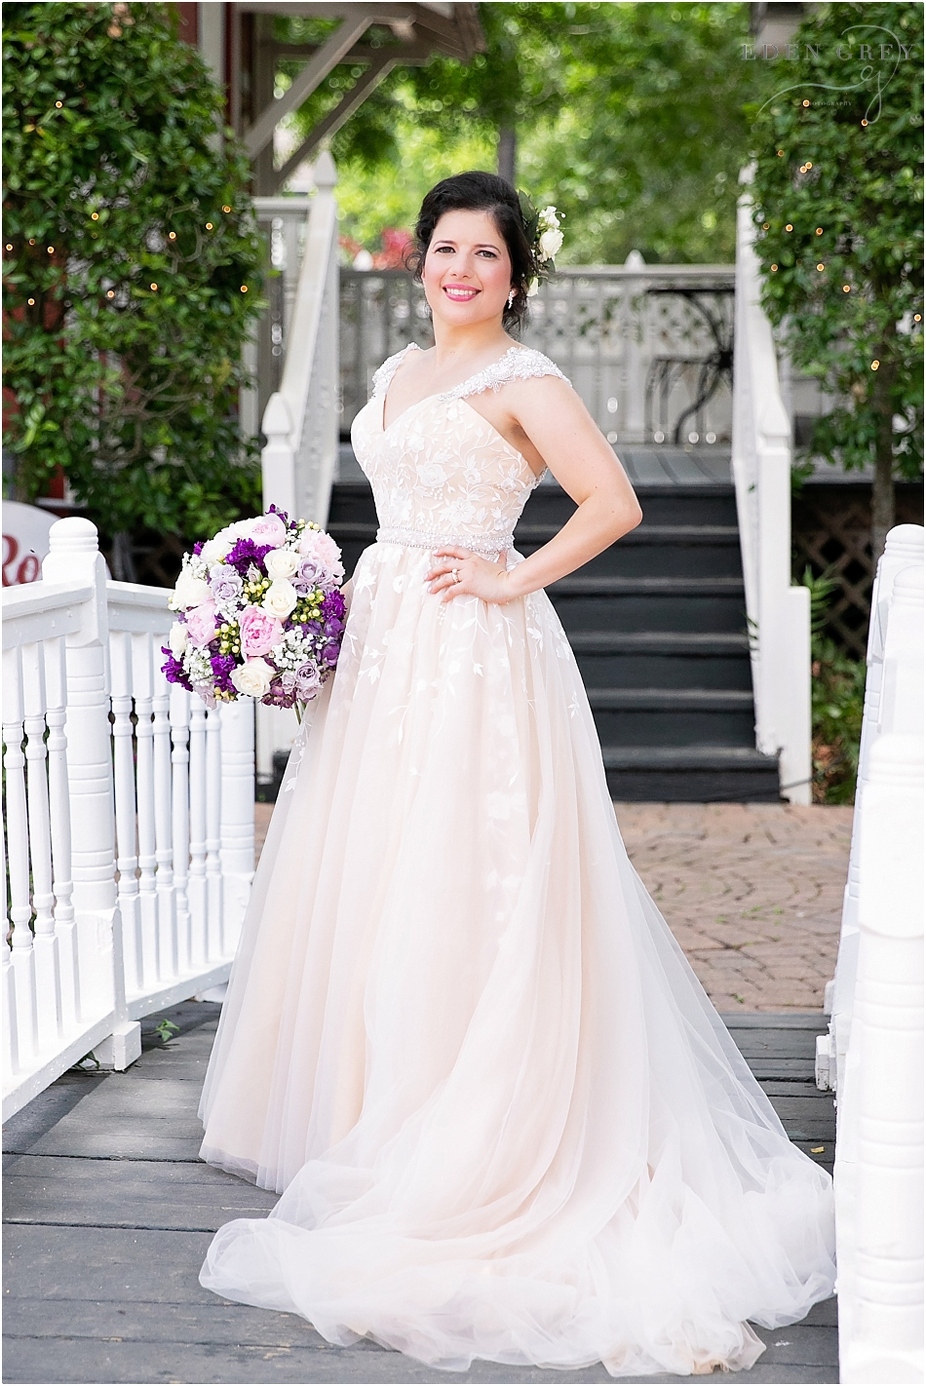 Bridal Portraits at Butlers Courtyard